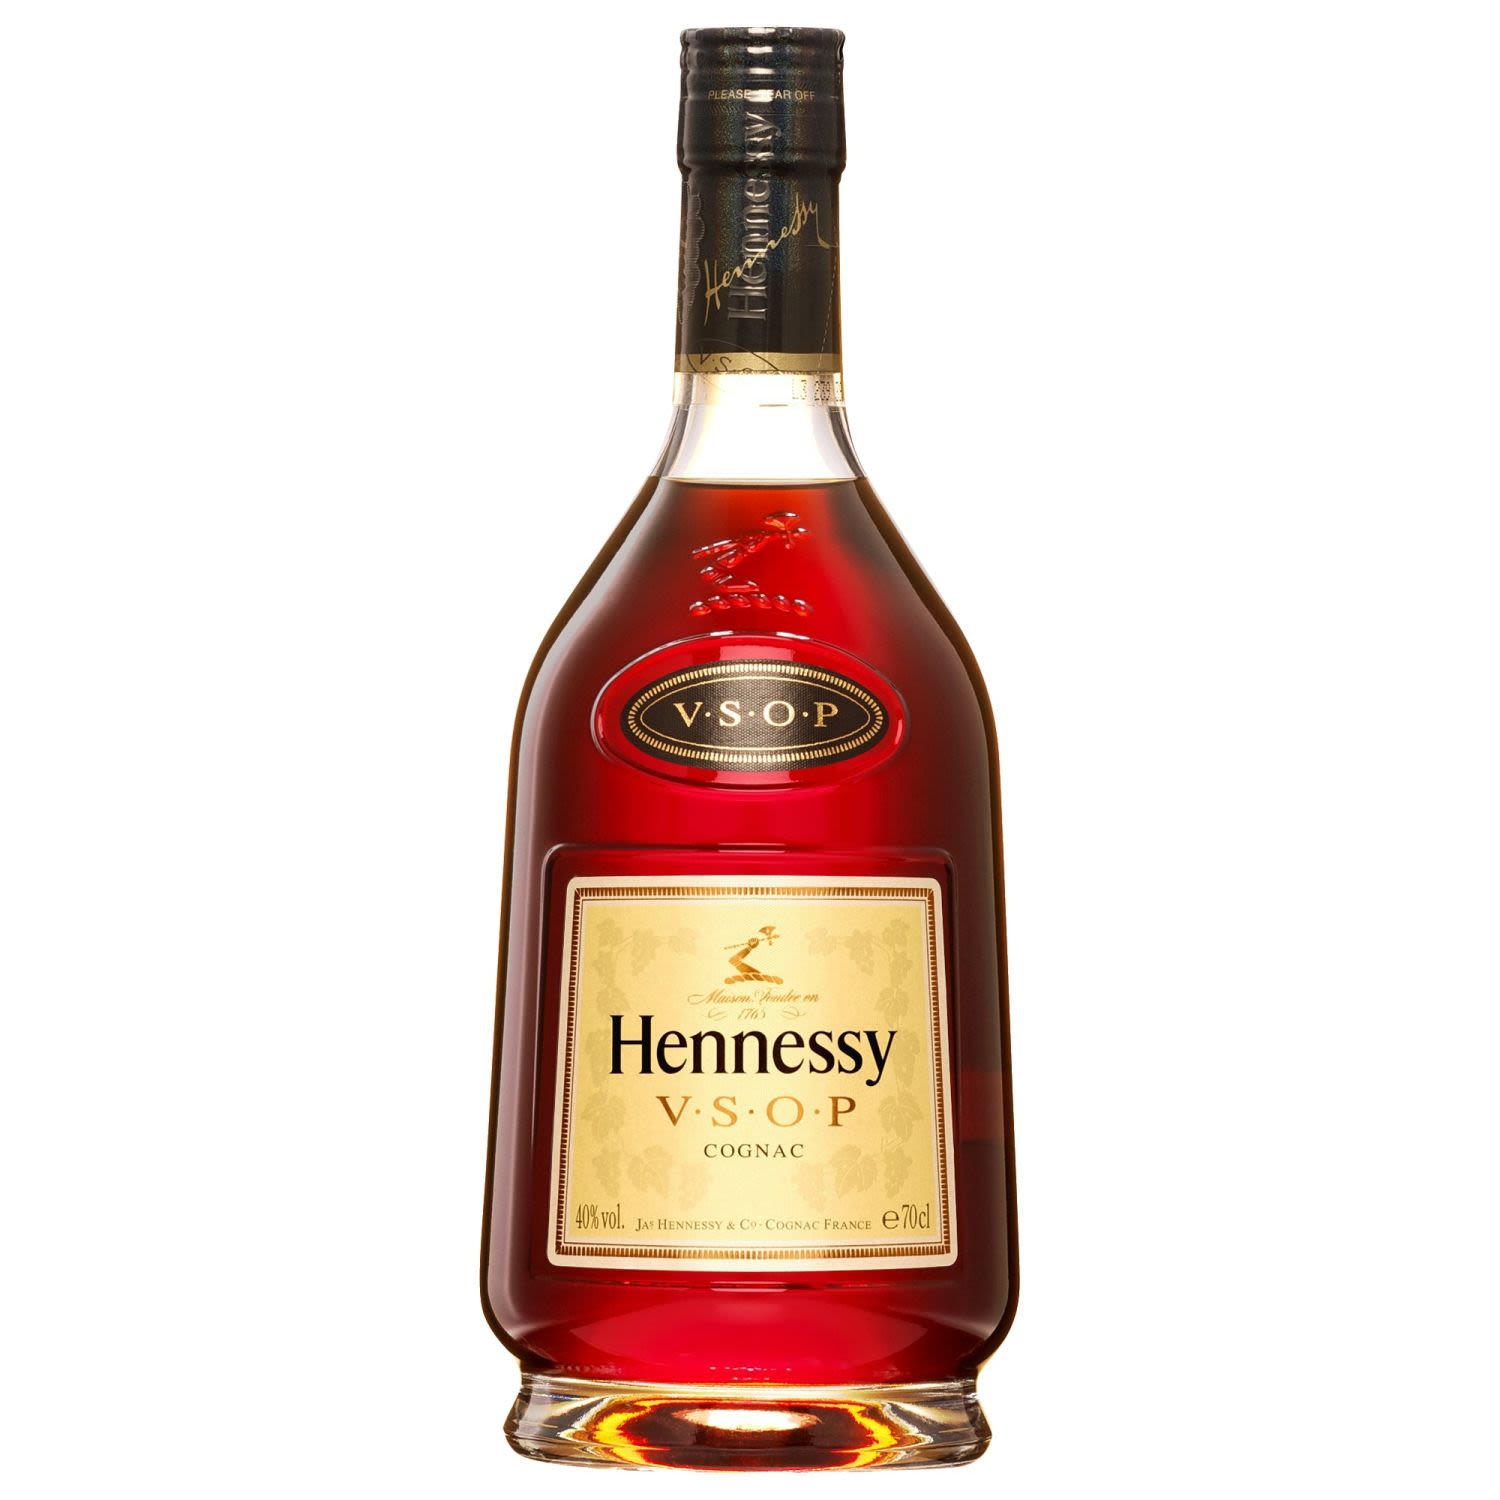 Hennessy V.S.O.P is a balanced cognac, expressing 200 years of Hennessy's know-how. The fruit of nature’s uncertainties, this unique blend has tamed the elements to craft and embody the original concept of cognac. The emotion awakened by the pleasure of tasting it continually reveals new facets of its personality.   The savoir-faire of the Maison Hennessy is fully expressed in this balanced cognac: the selection of eaux-de-vie, aging and assemblage. A cognac of remarkable consistency and vitality, Hennessy V.S.O.P Privilège conveys all of the savoir-faire of the Hennessy master blenders who have ensured the continued success of this harmonious assemblage for 200 years.<br /> <br />Alcohol Volume: 40.00%<br /><br />Pack Format: Bottle<br /><br />Standard Drinks: 22<br /><br />Pack Type: Bottle<br /><br />Country of Origin: France<br />